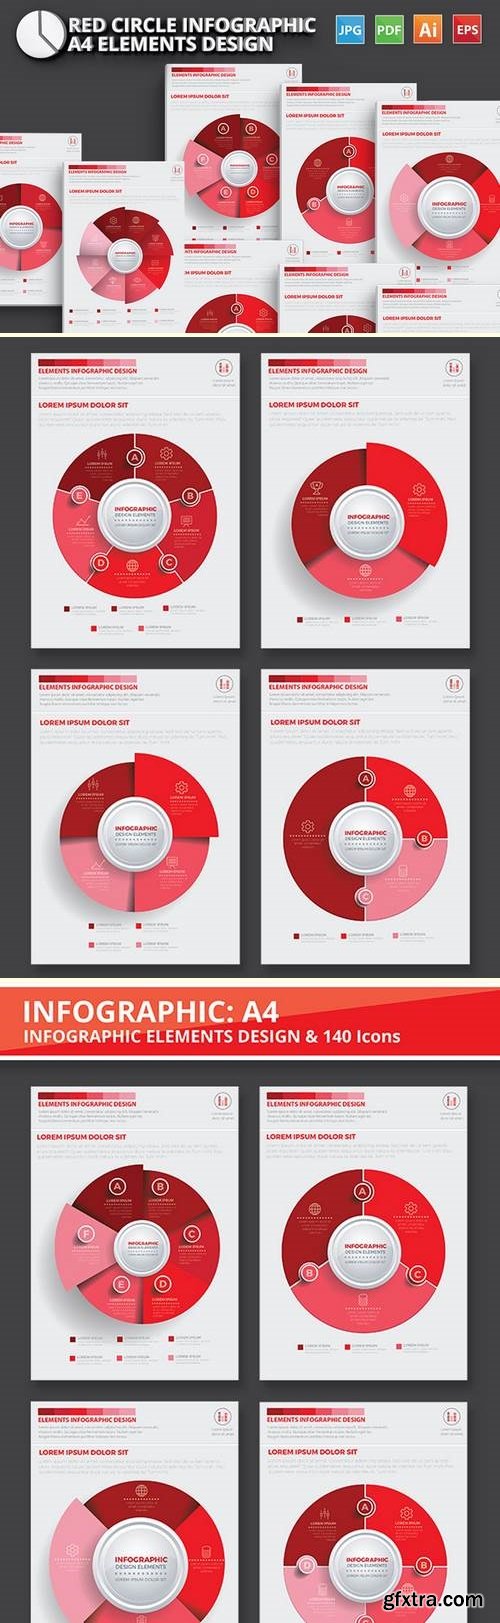 Red Circle Infographic Design